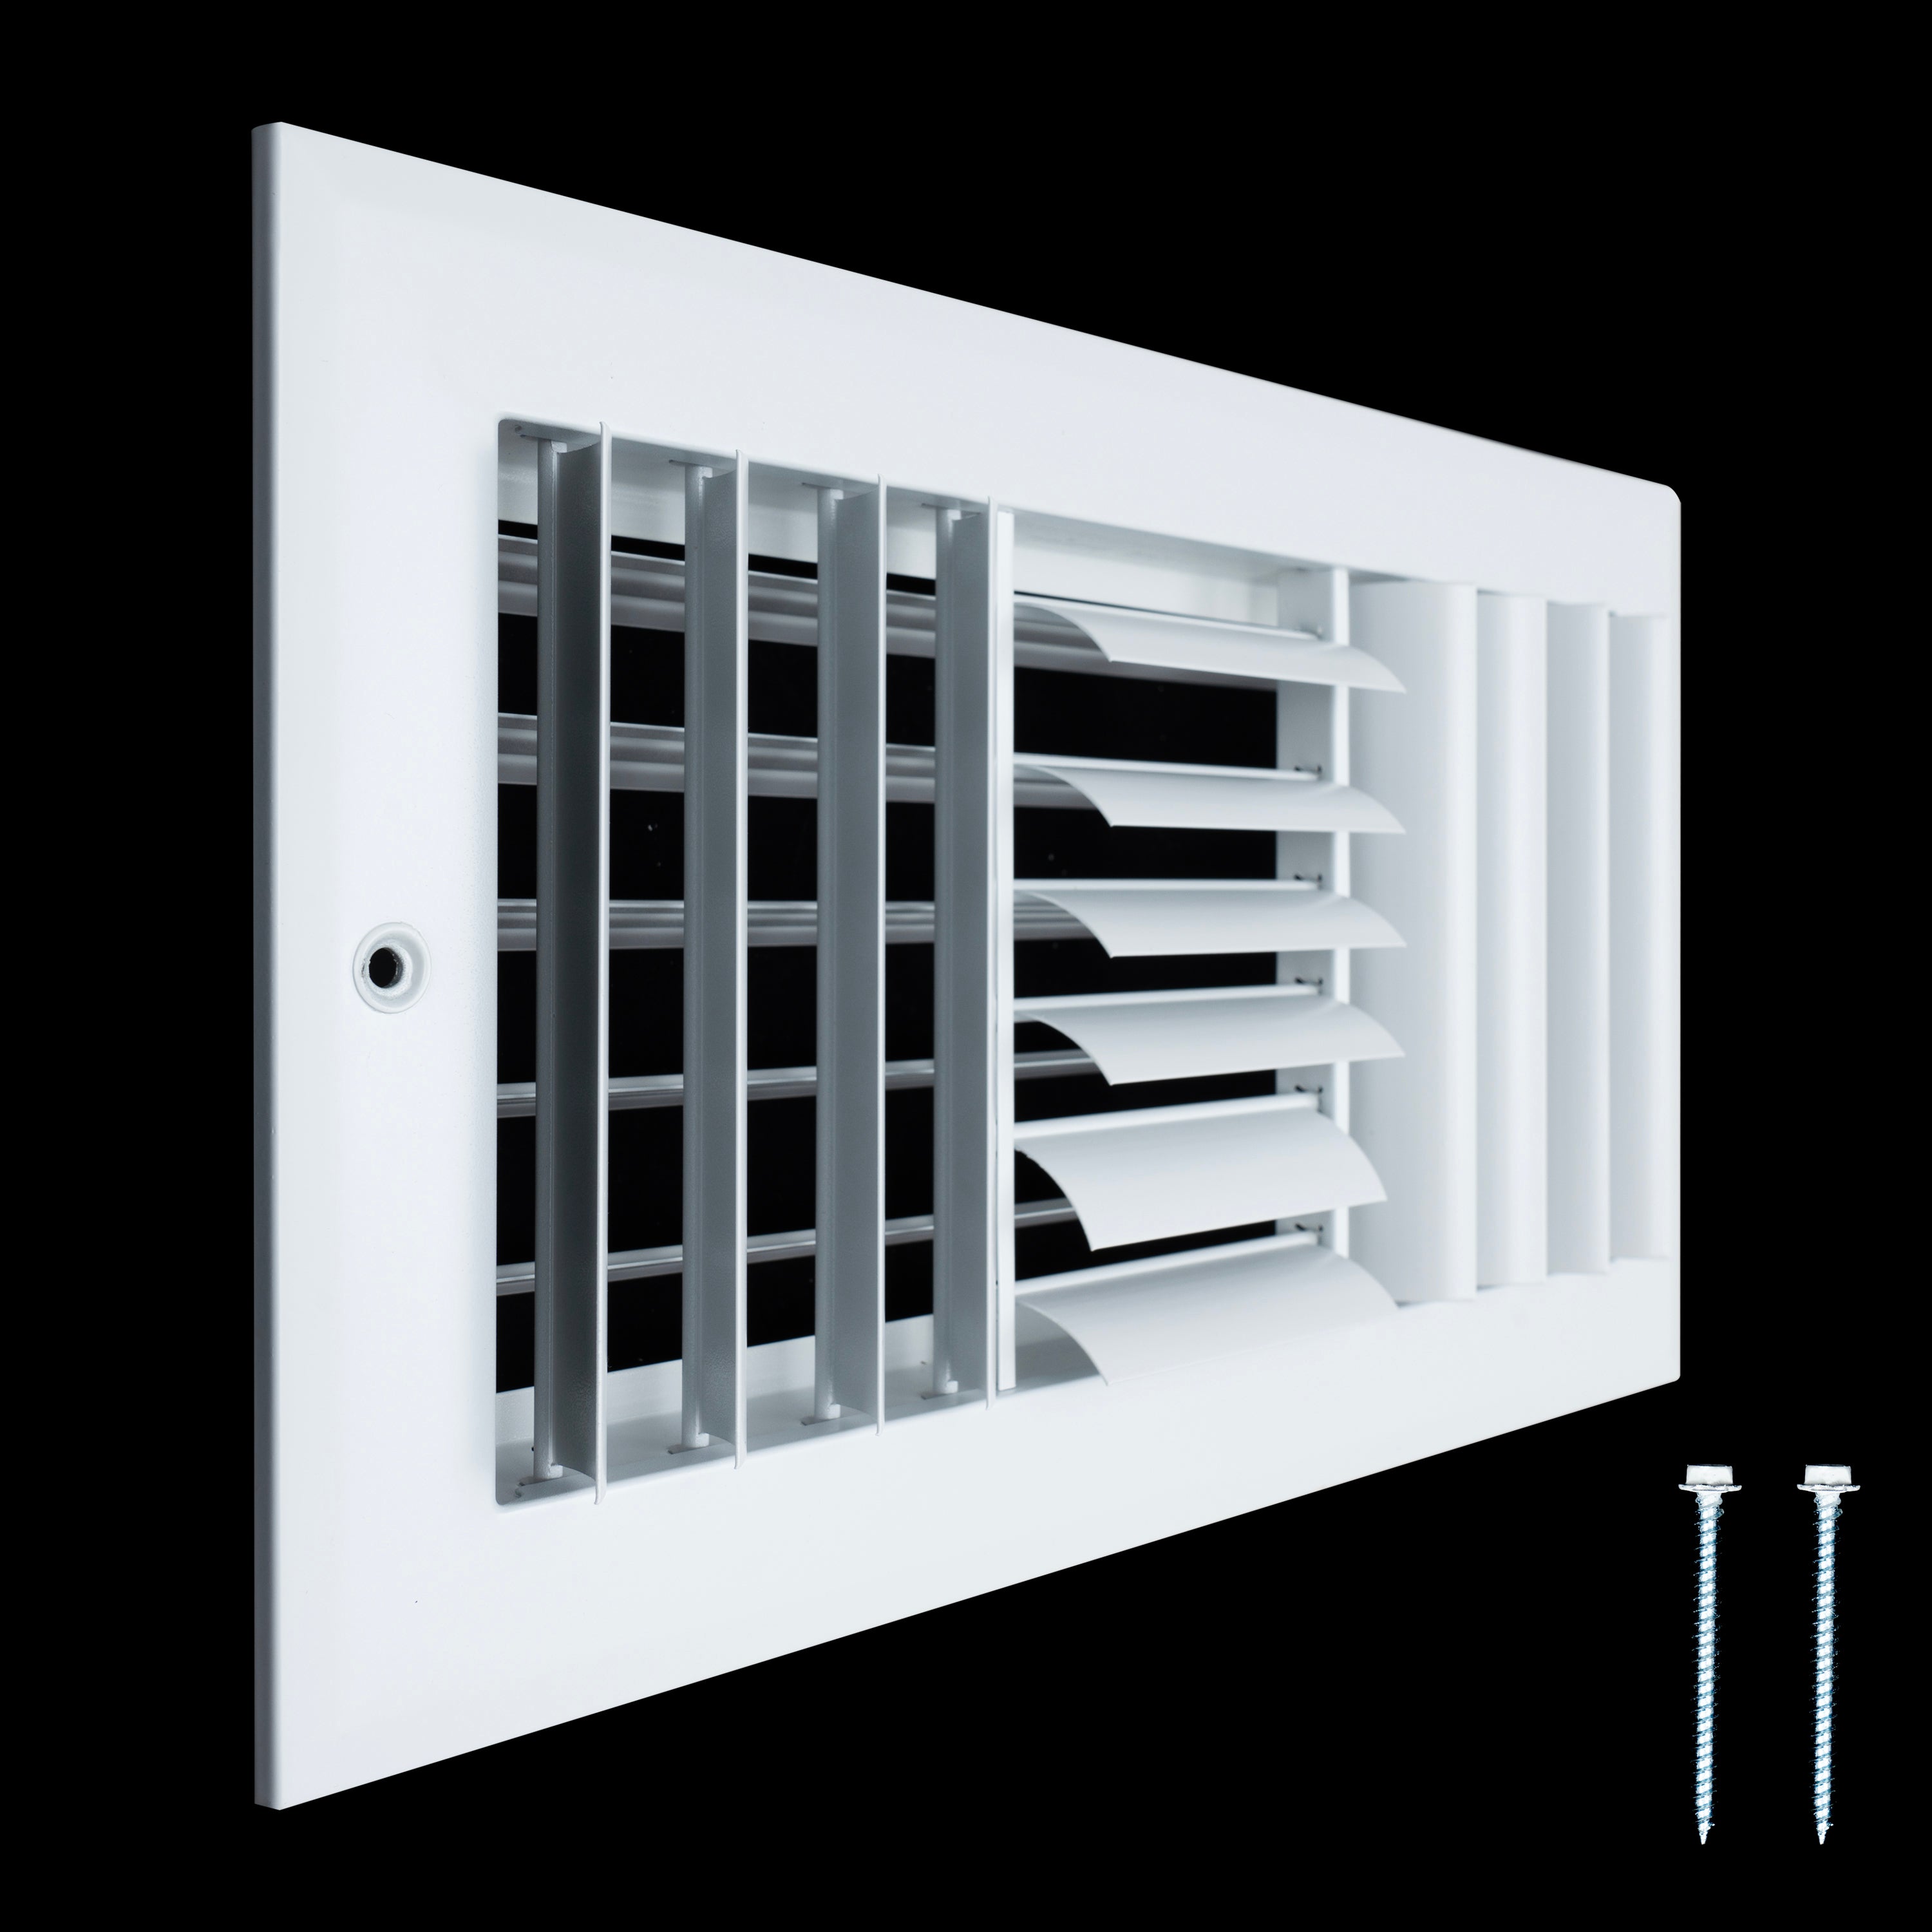 12"W x 6"H [Duct Opening] Aluminum 3-WAY Adjustable Air Supply Grille | Register Vent Cover Grill for Sidewall and Ceiling | White | Outer Dimensions: 13.75"W x 7.75"